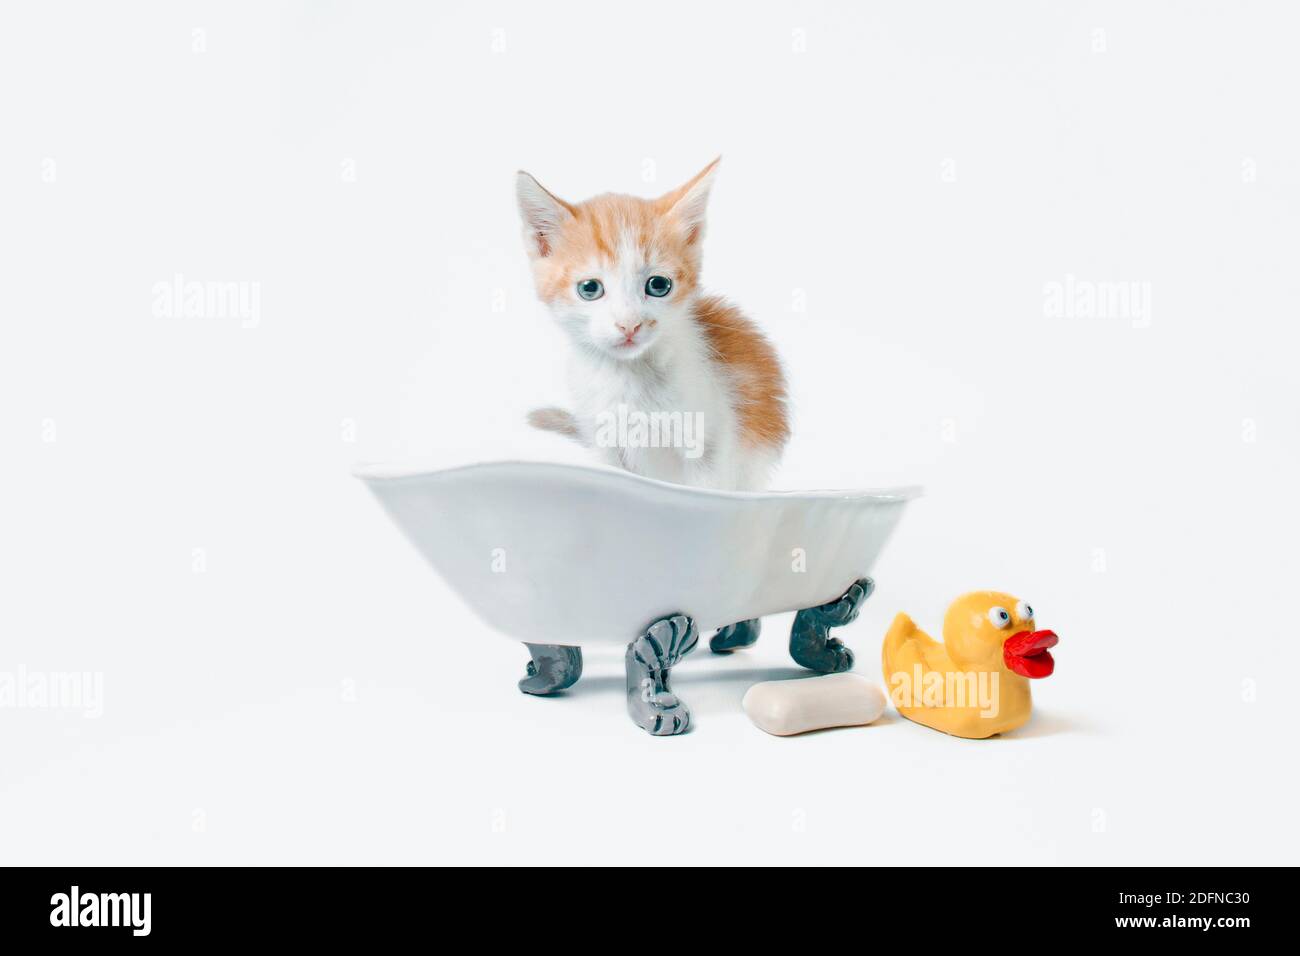 grooming red and white kitten sits in a toy bathtub next to a bar of soap and a yellow rubber duckie Stock Photo